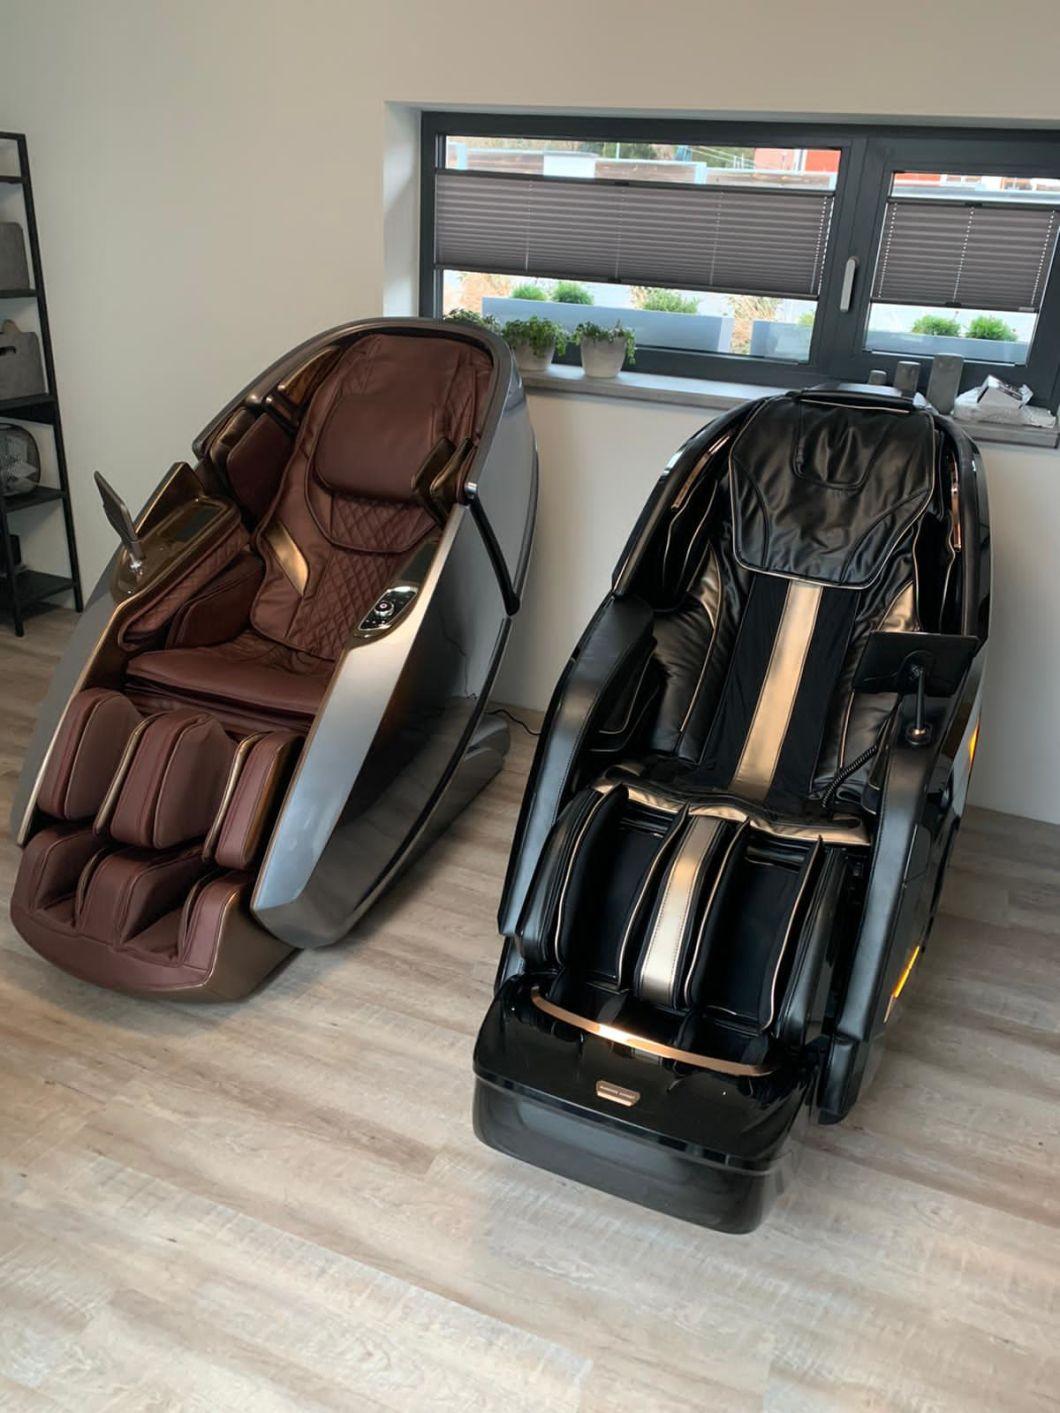 Unique Morningstar Reclining Ms239 Salon Relax Massage Chair with Heating